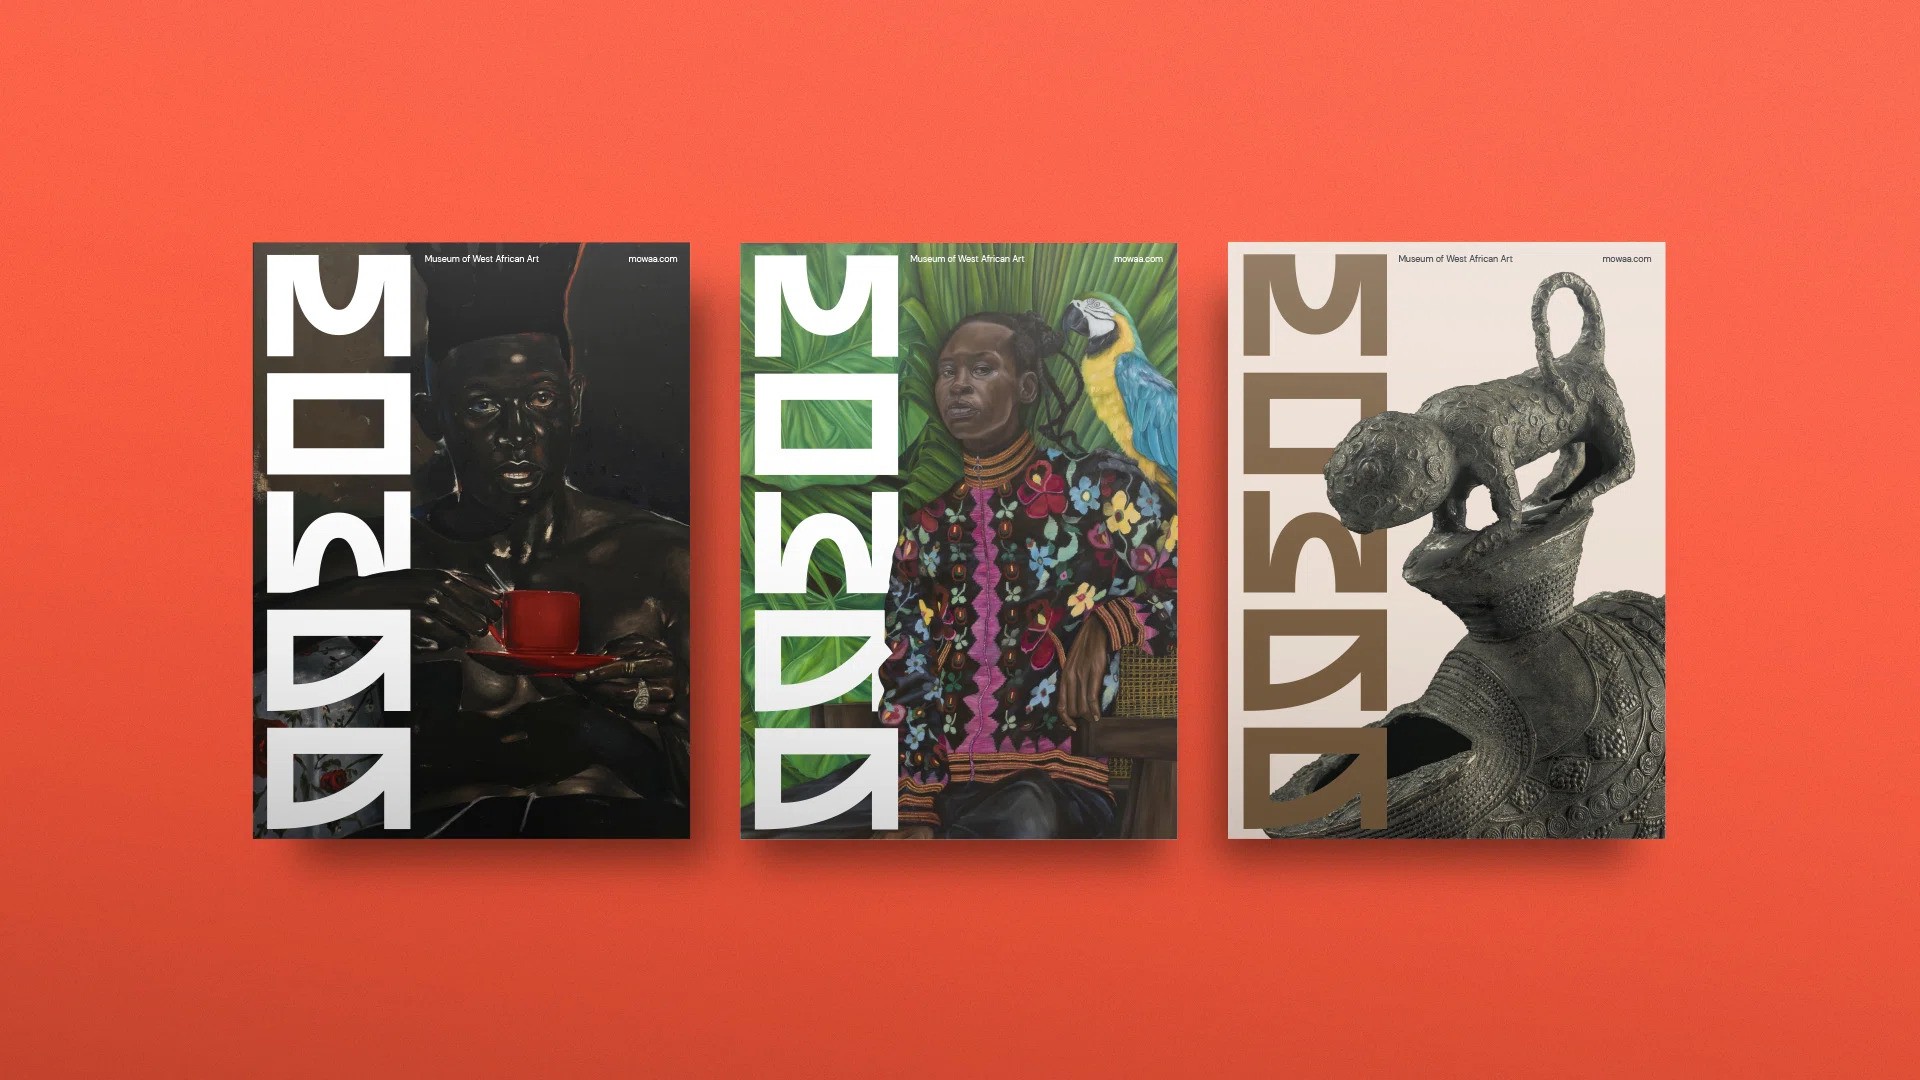 MOWAA Rebrand: Museum of West African Art Steps into the Digital Realm With New Brand Identity